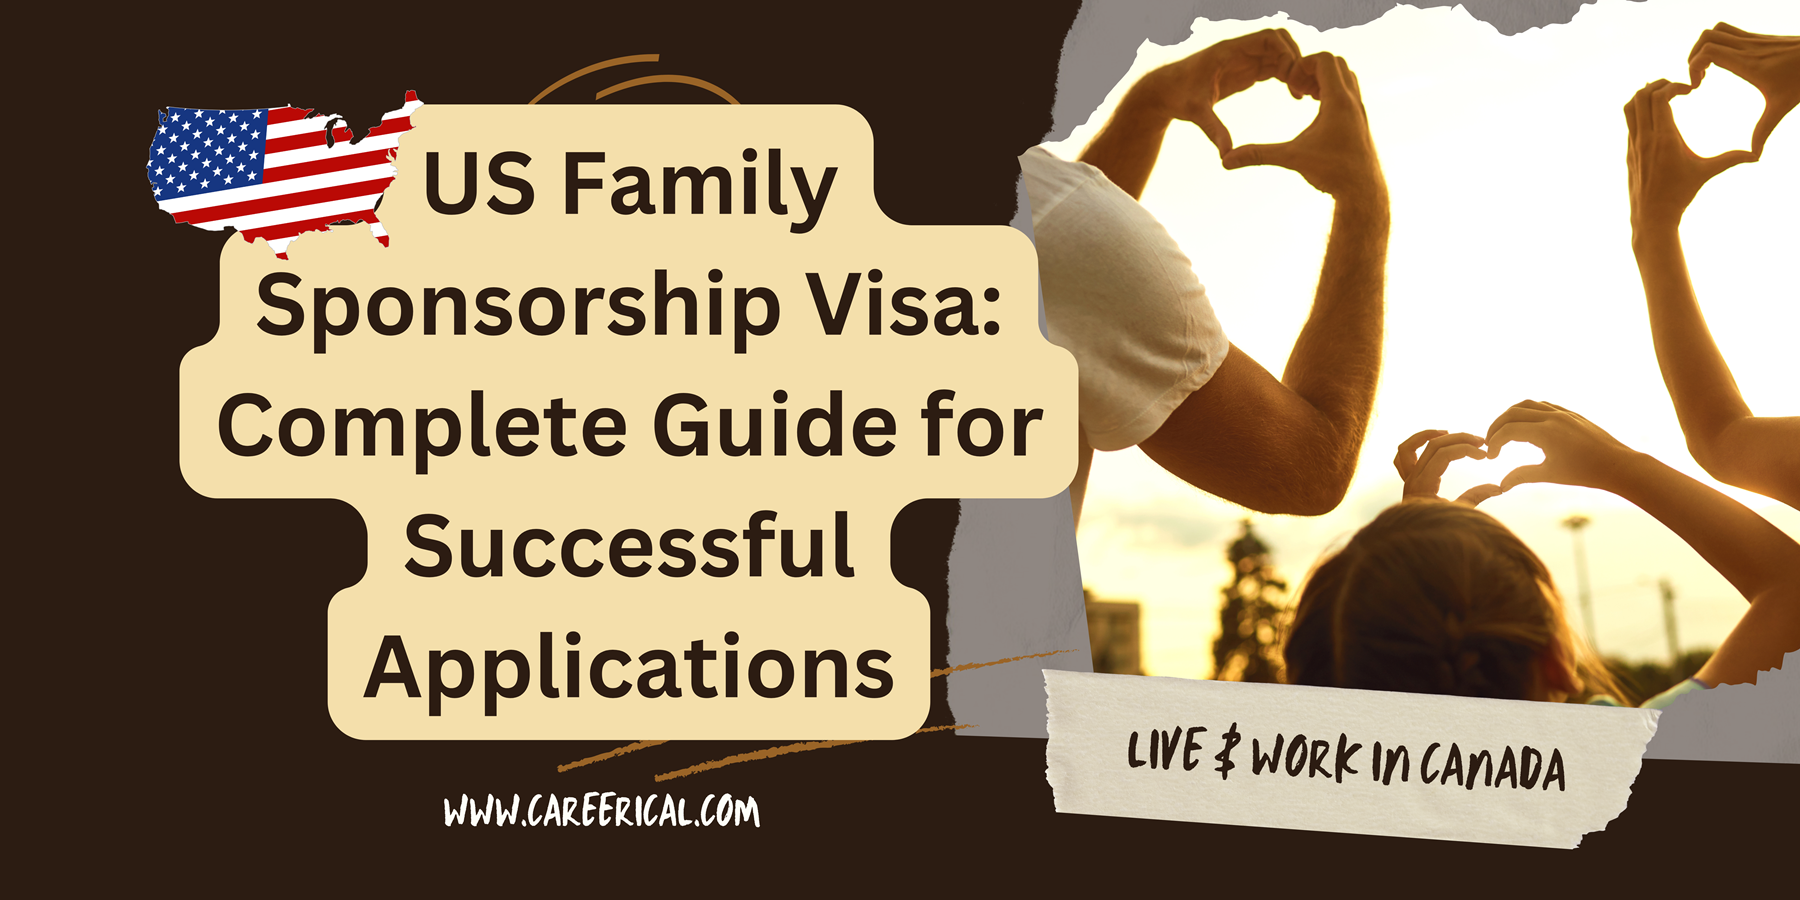 US Family Sponsorship Visa Complete Guide for Successful Applications